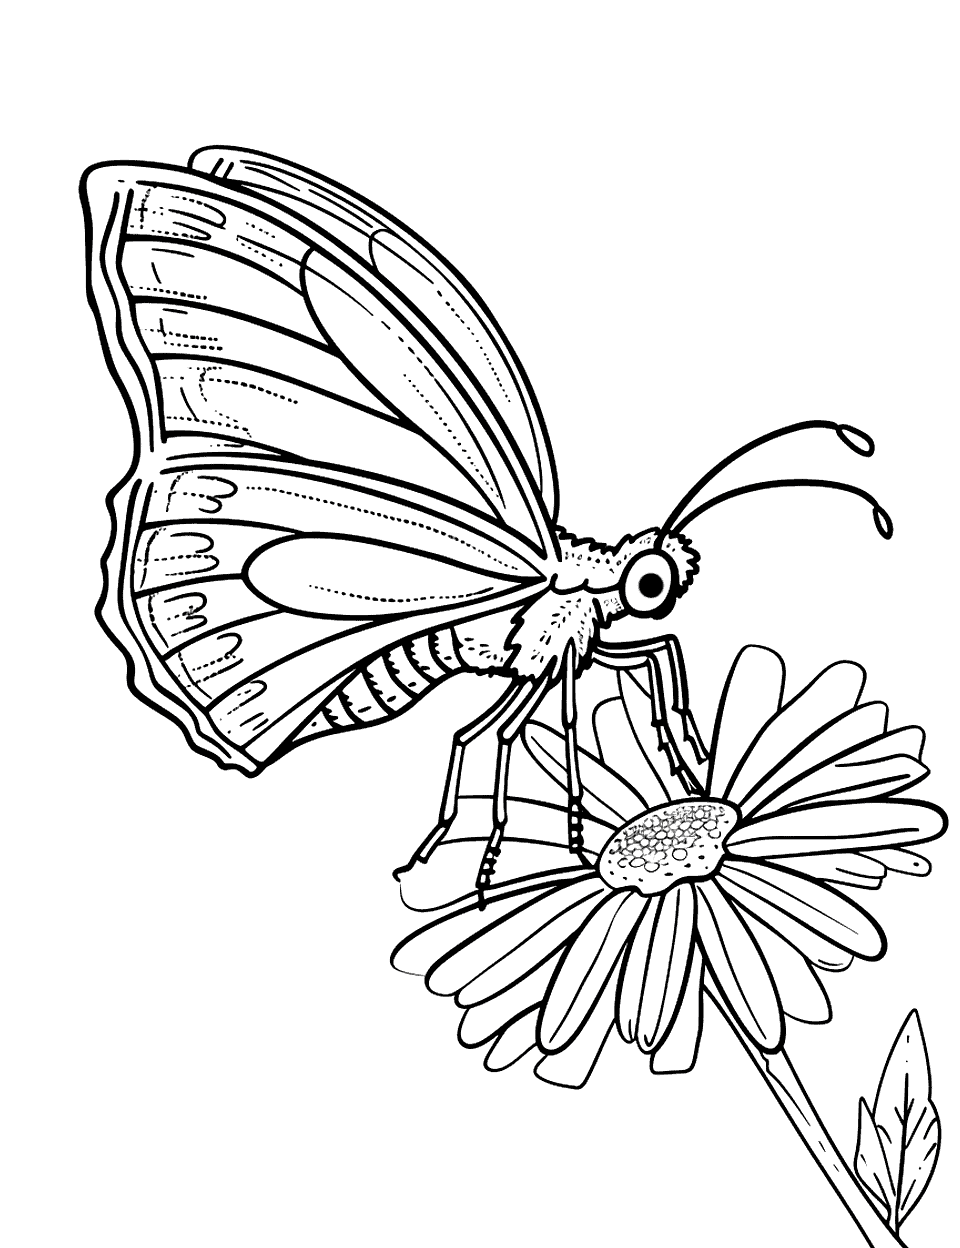 Butterfly Resting on a Flower Insect Coloring Page - A simple butterfly with its wings wide open, perched delicately on a bright blossom.